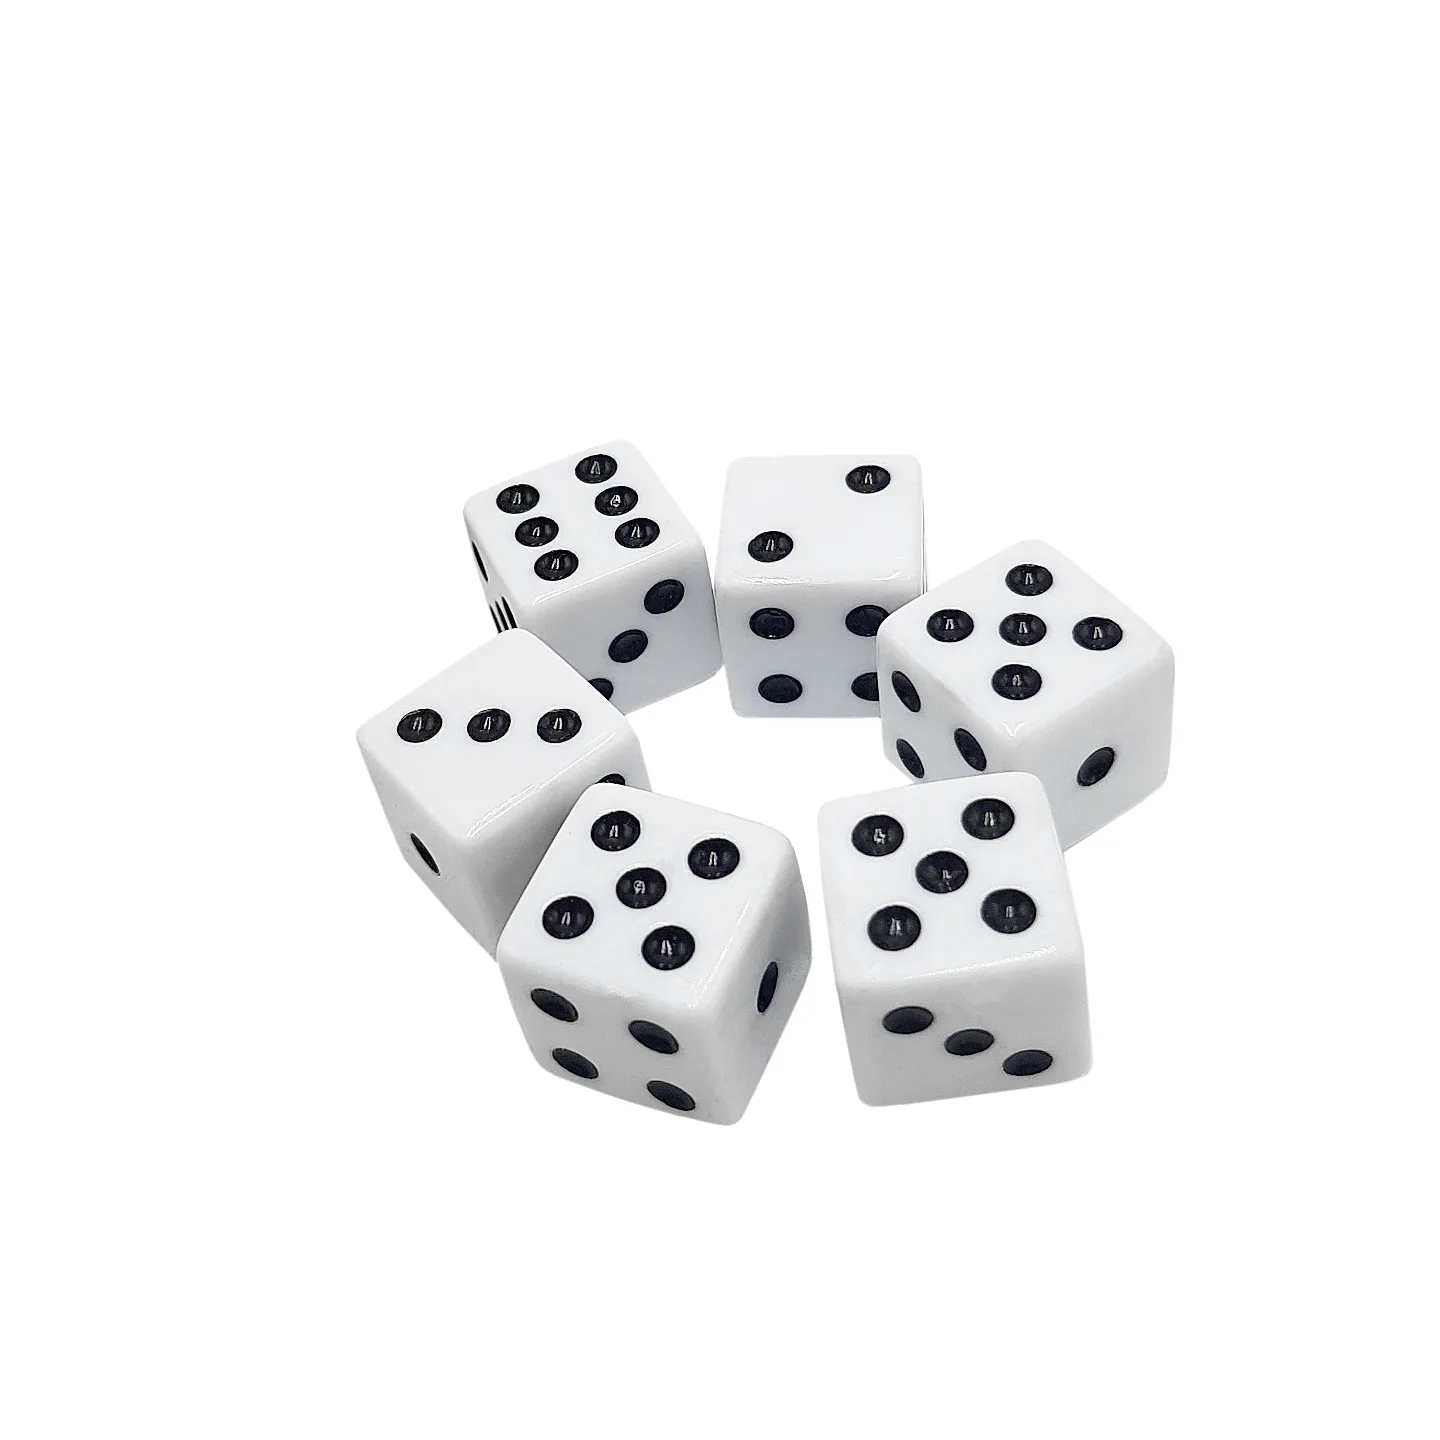 10pcs 16mm blank white can write dice counting cubes square gaming dice ODUS 